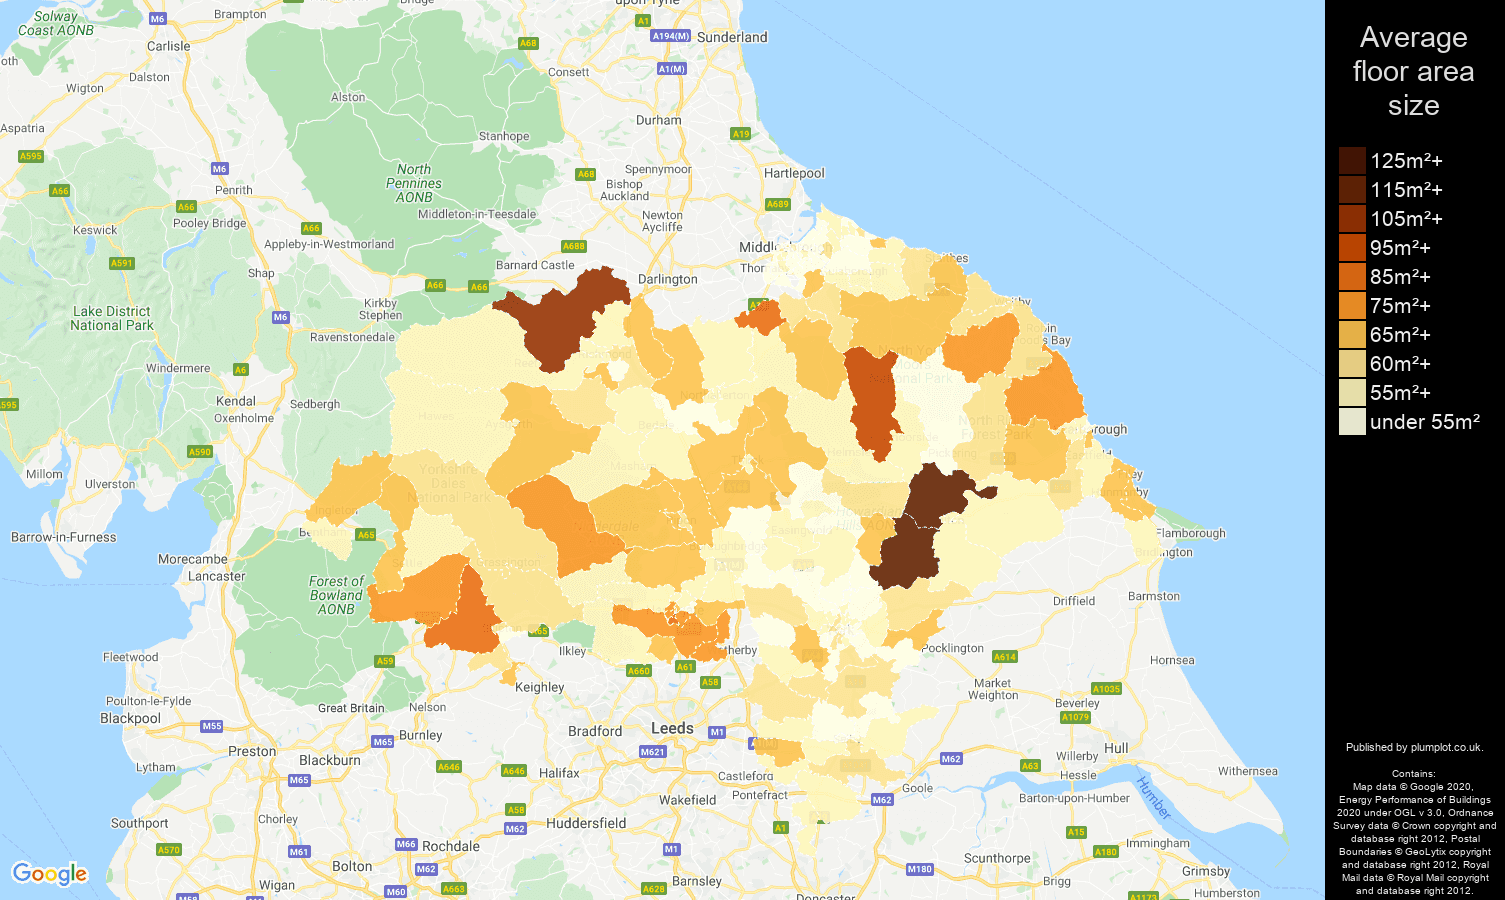 North Yorkshire map of average floor area size of flats